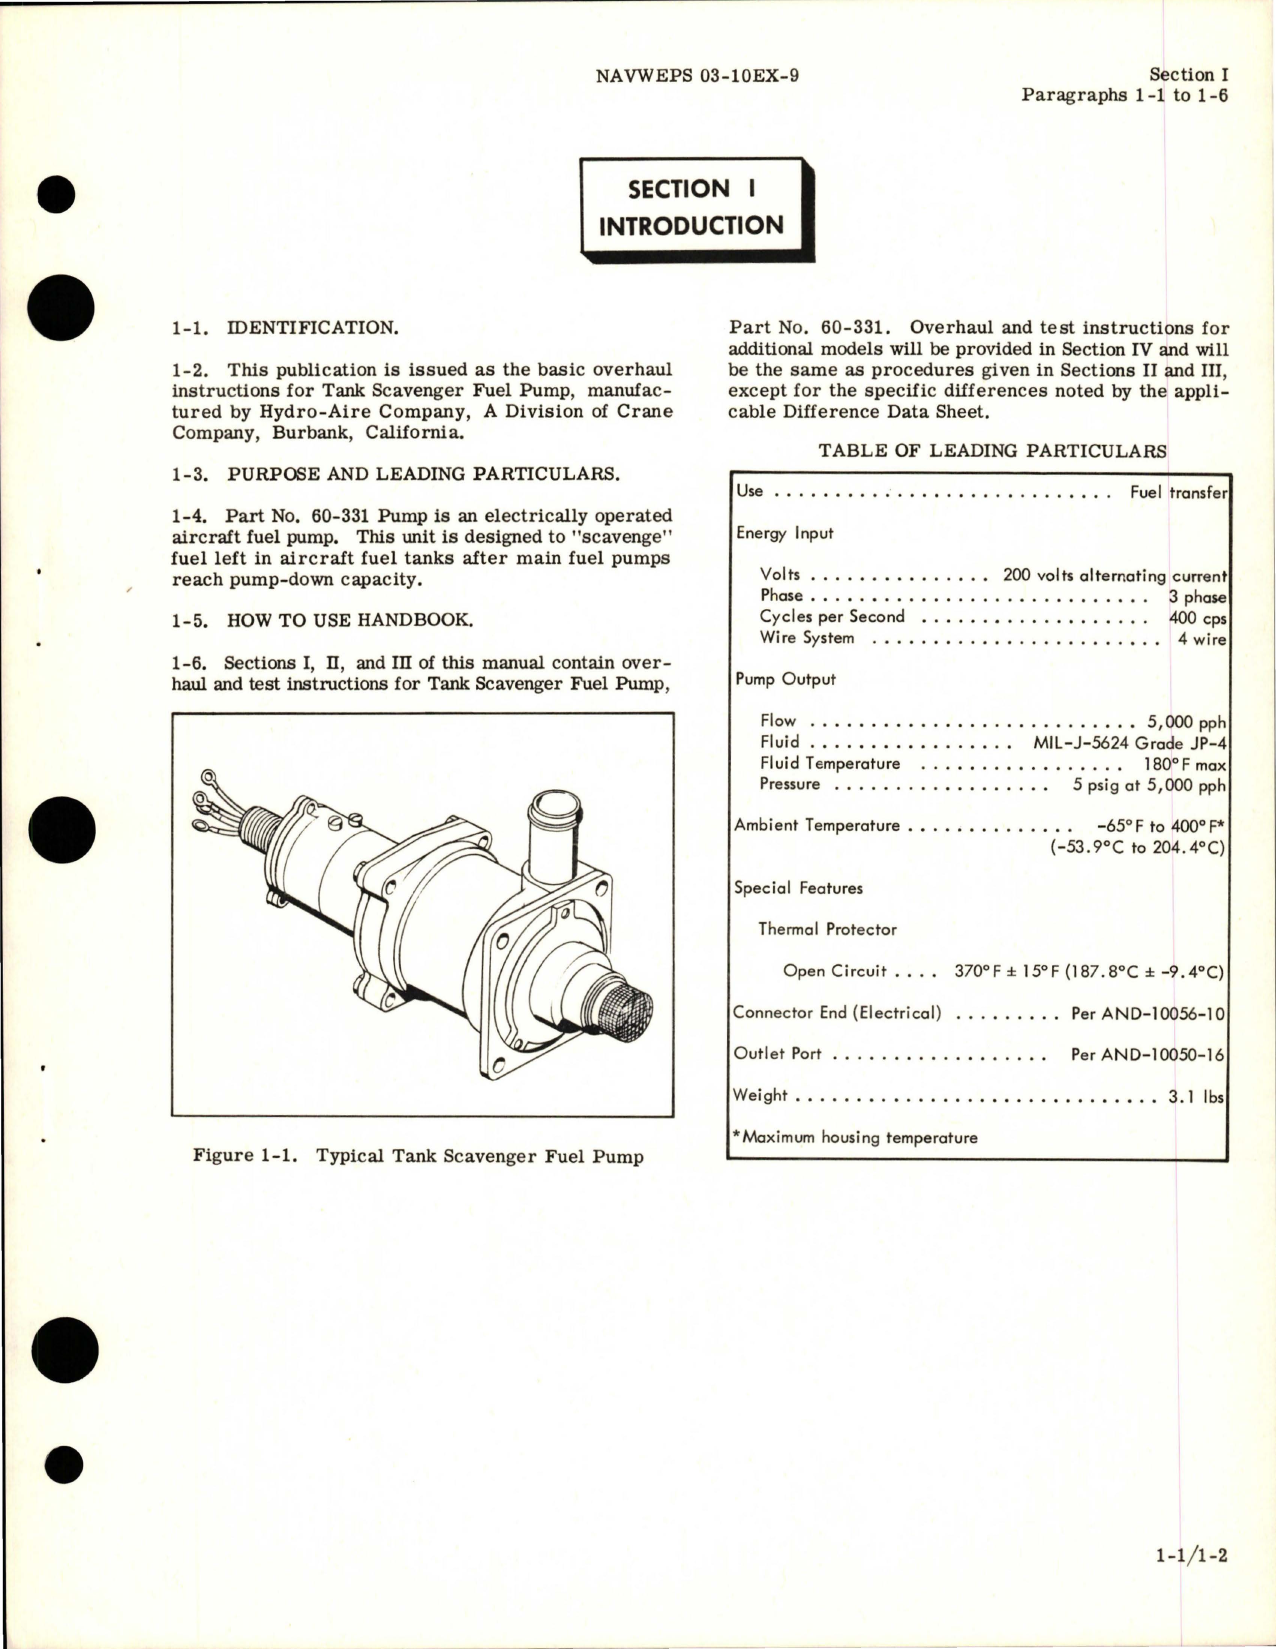 Sample page 5 from AirCorps Library document: Overhaul Instructions for Tank Scavenger Fuel Pump - Part 60-331 